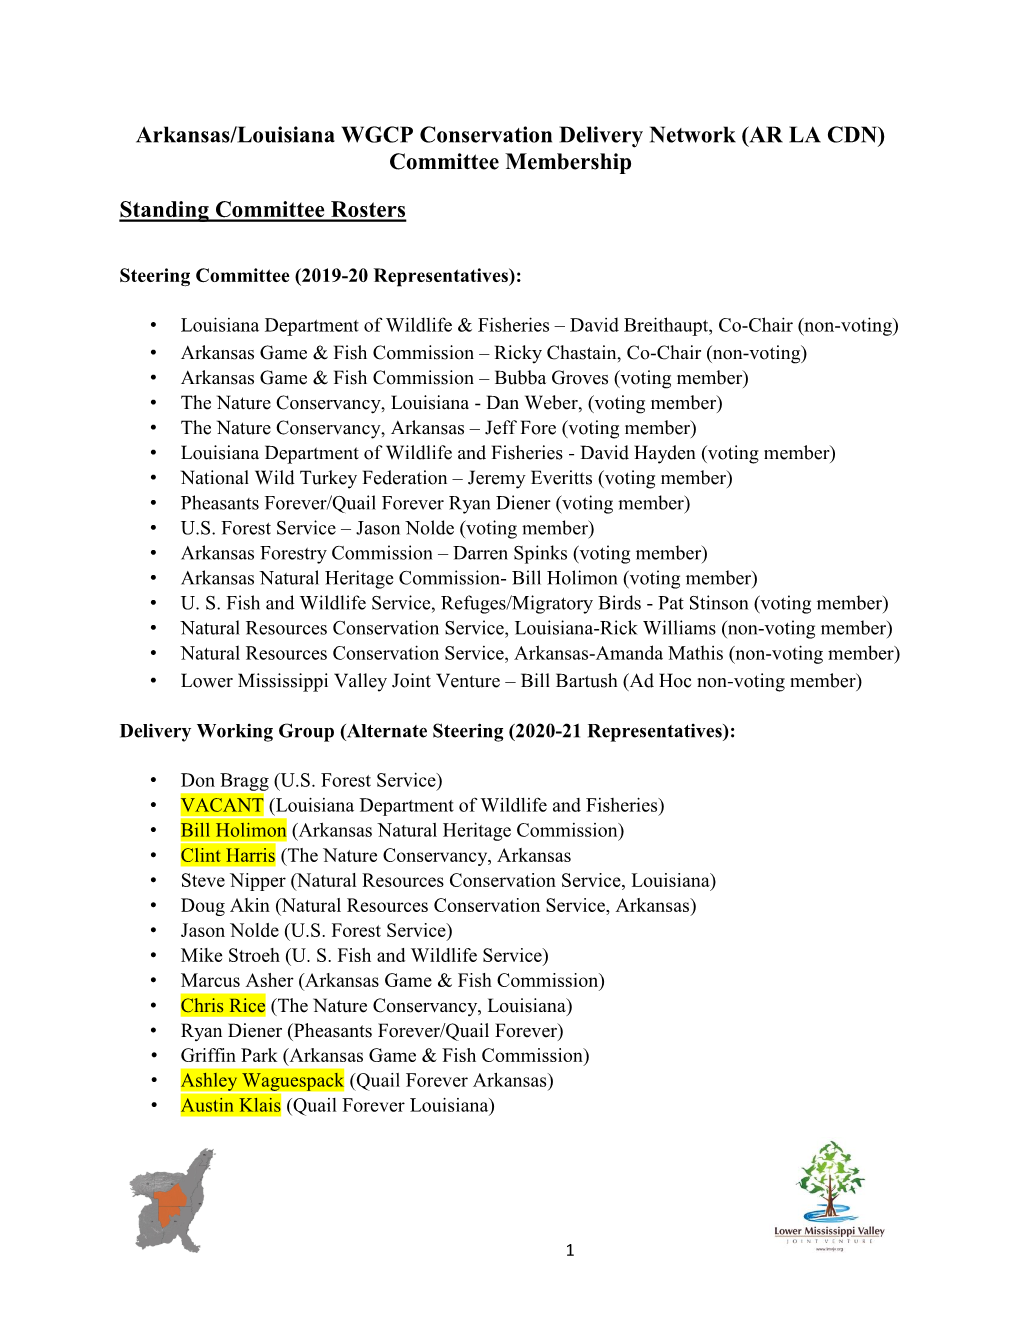 Arkansas/Louisiana WGCP Conservation Delivery Network (AR LA CDN) Committee Membership Standing Committee Rosters